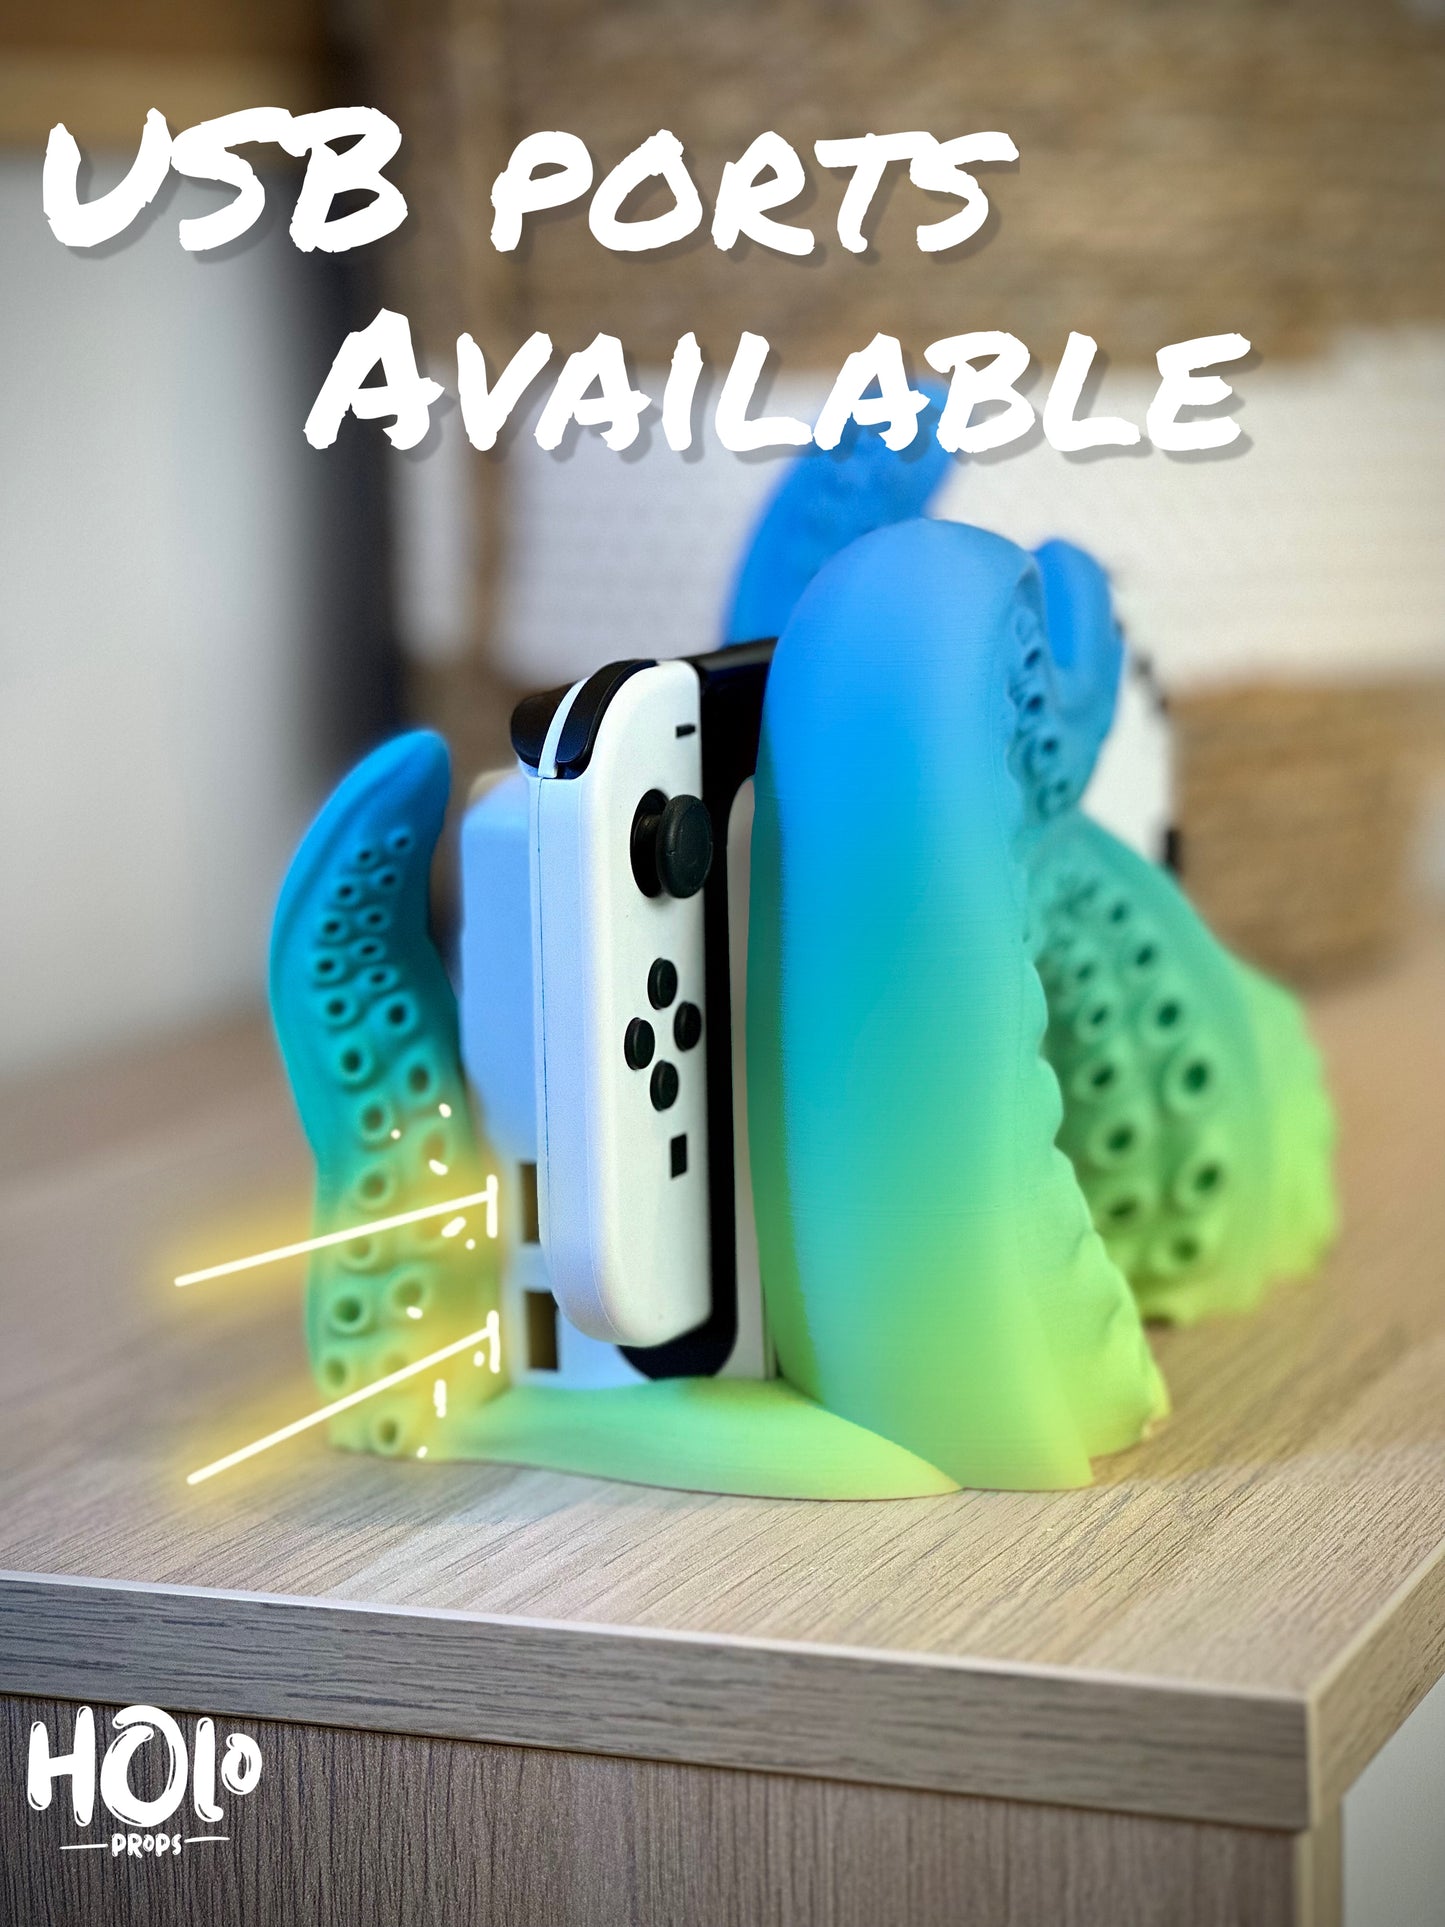 Tentacle Console Decoration - Compatible with Nintendo Switch Classic and OLED models